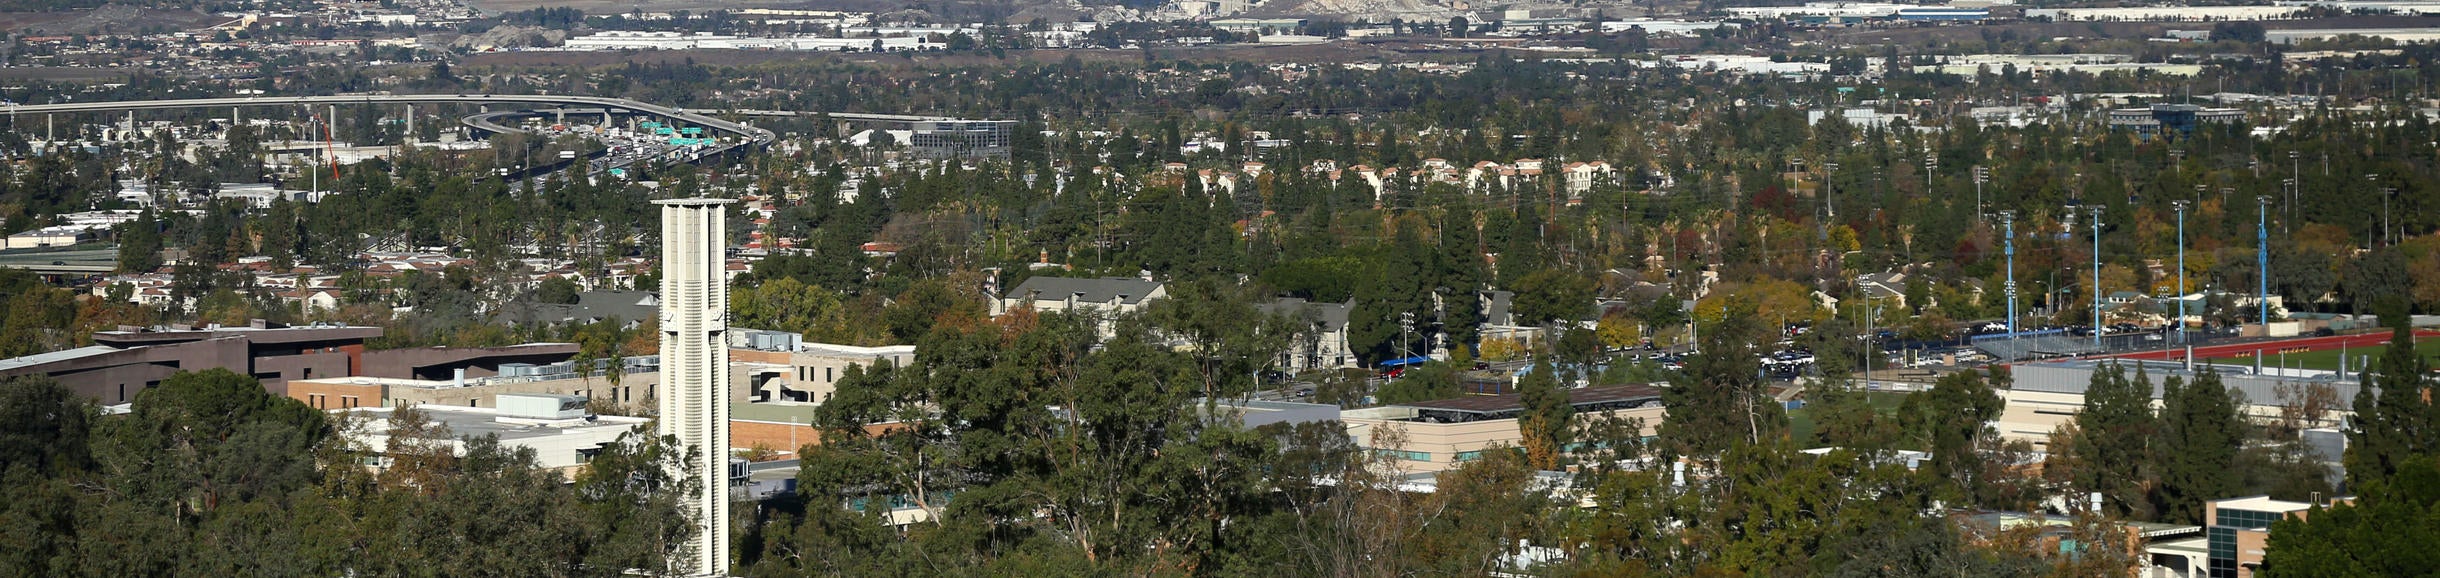 UCR Bell Tower seen from a distance with snowy mountains in the background